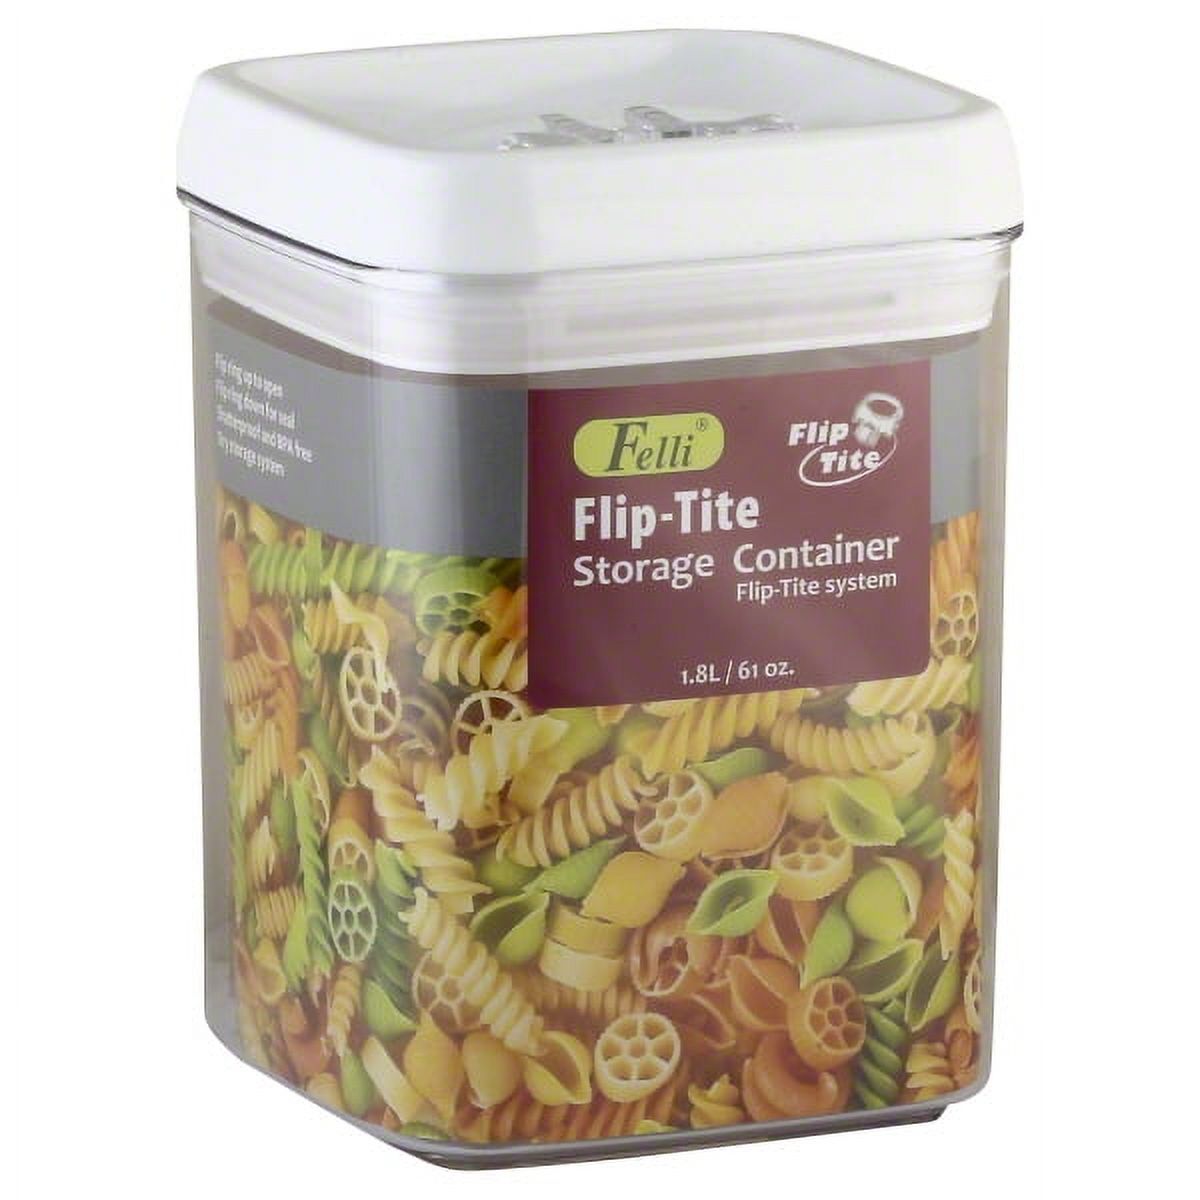 Better Homes & Gardens Flip-Tite Square Container, 7.5 Cups - image 1 of 3